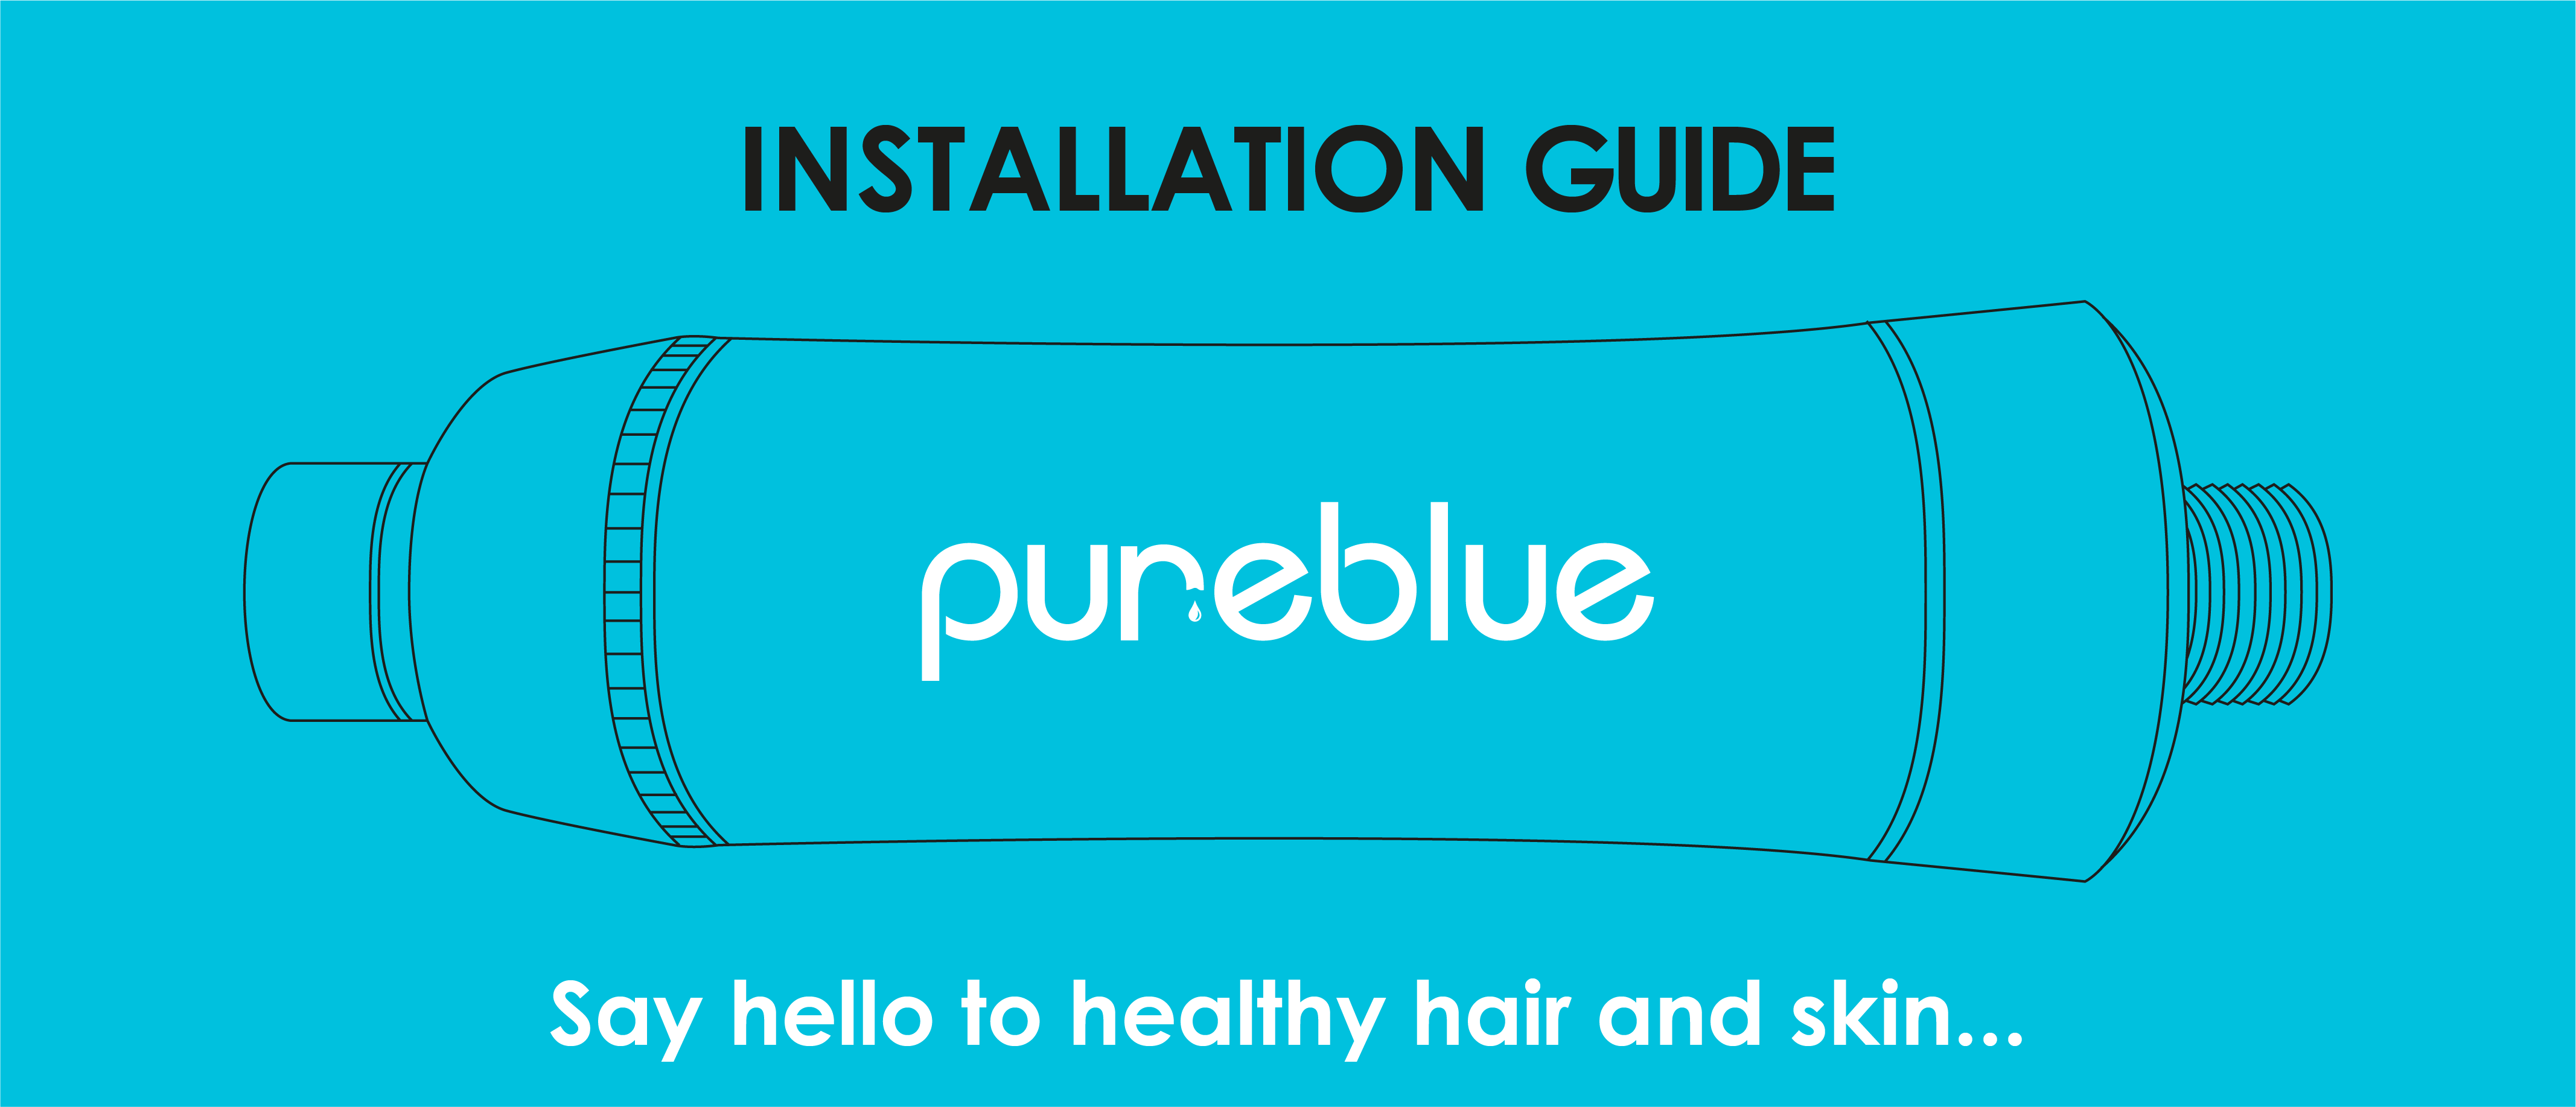 H2O Pure Blue Shower Filter Installation Guide - 1